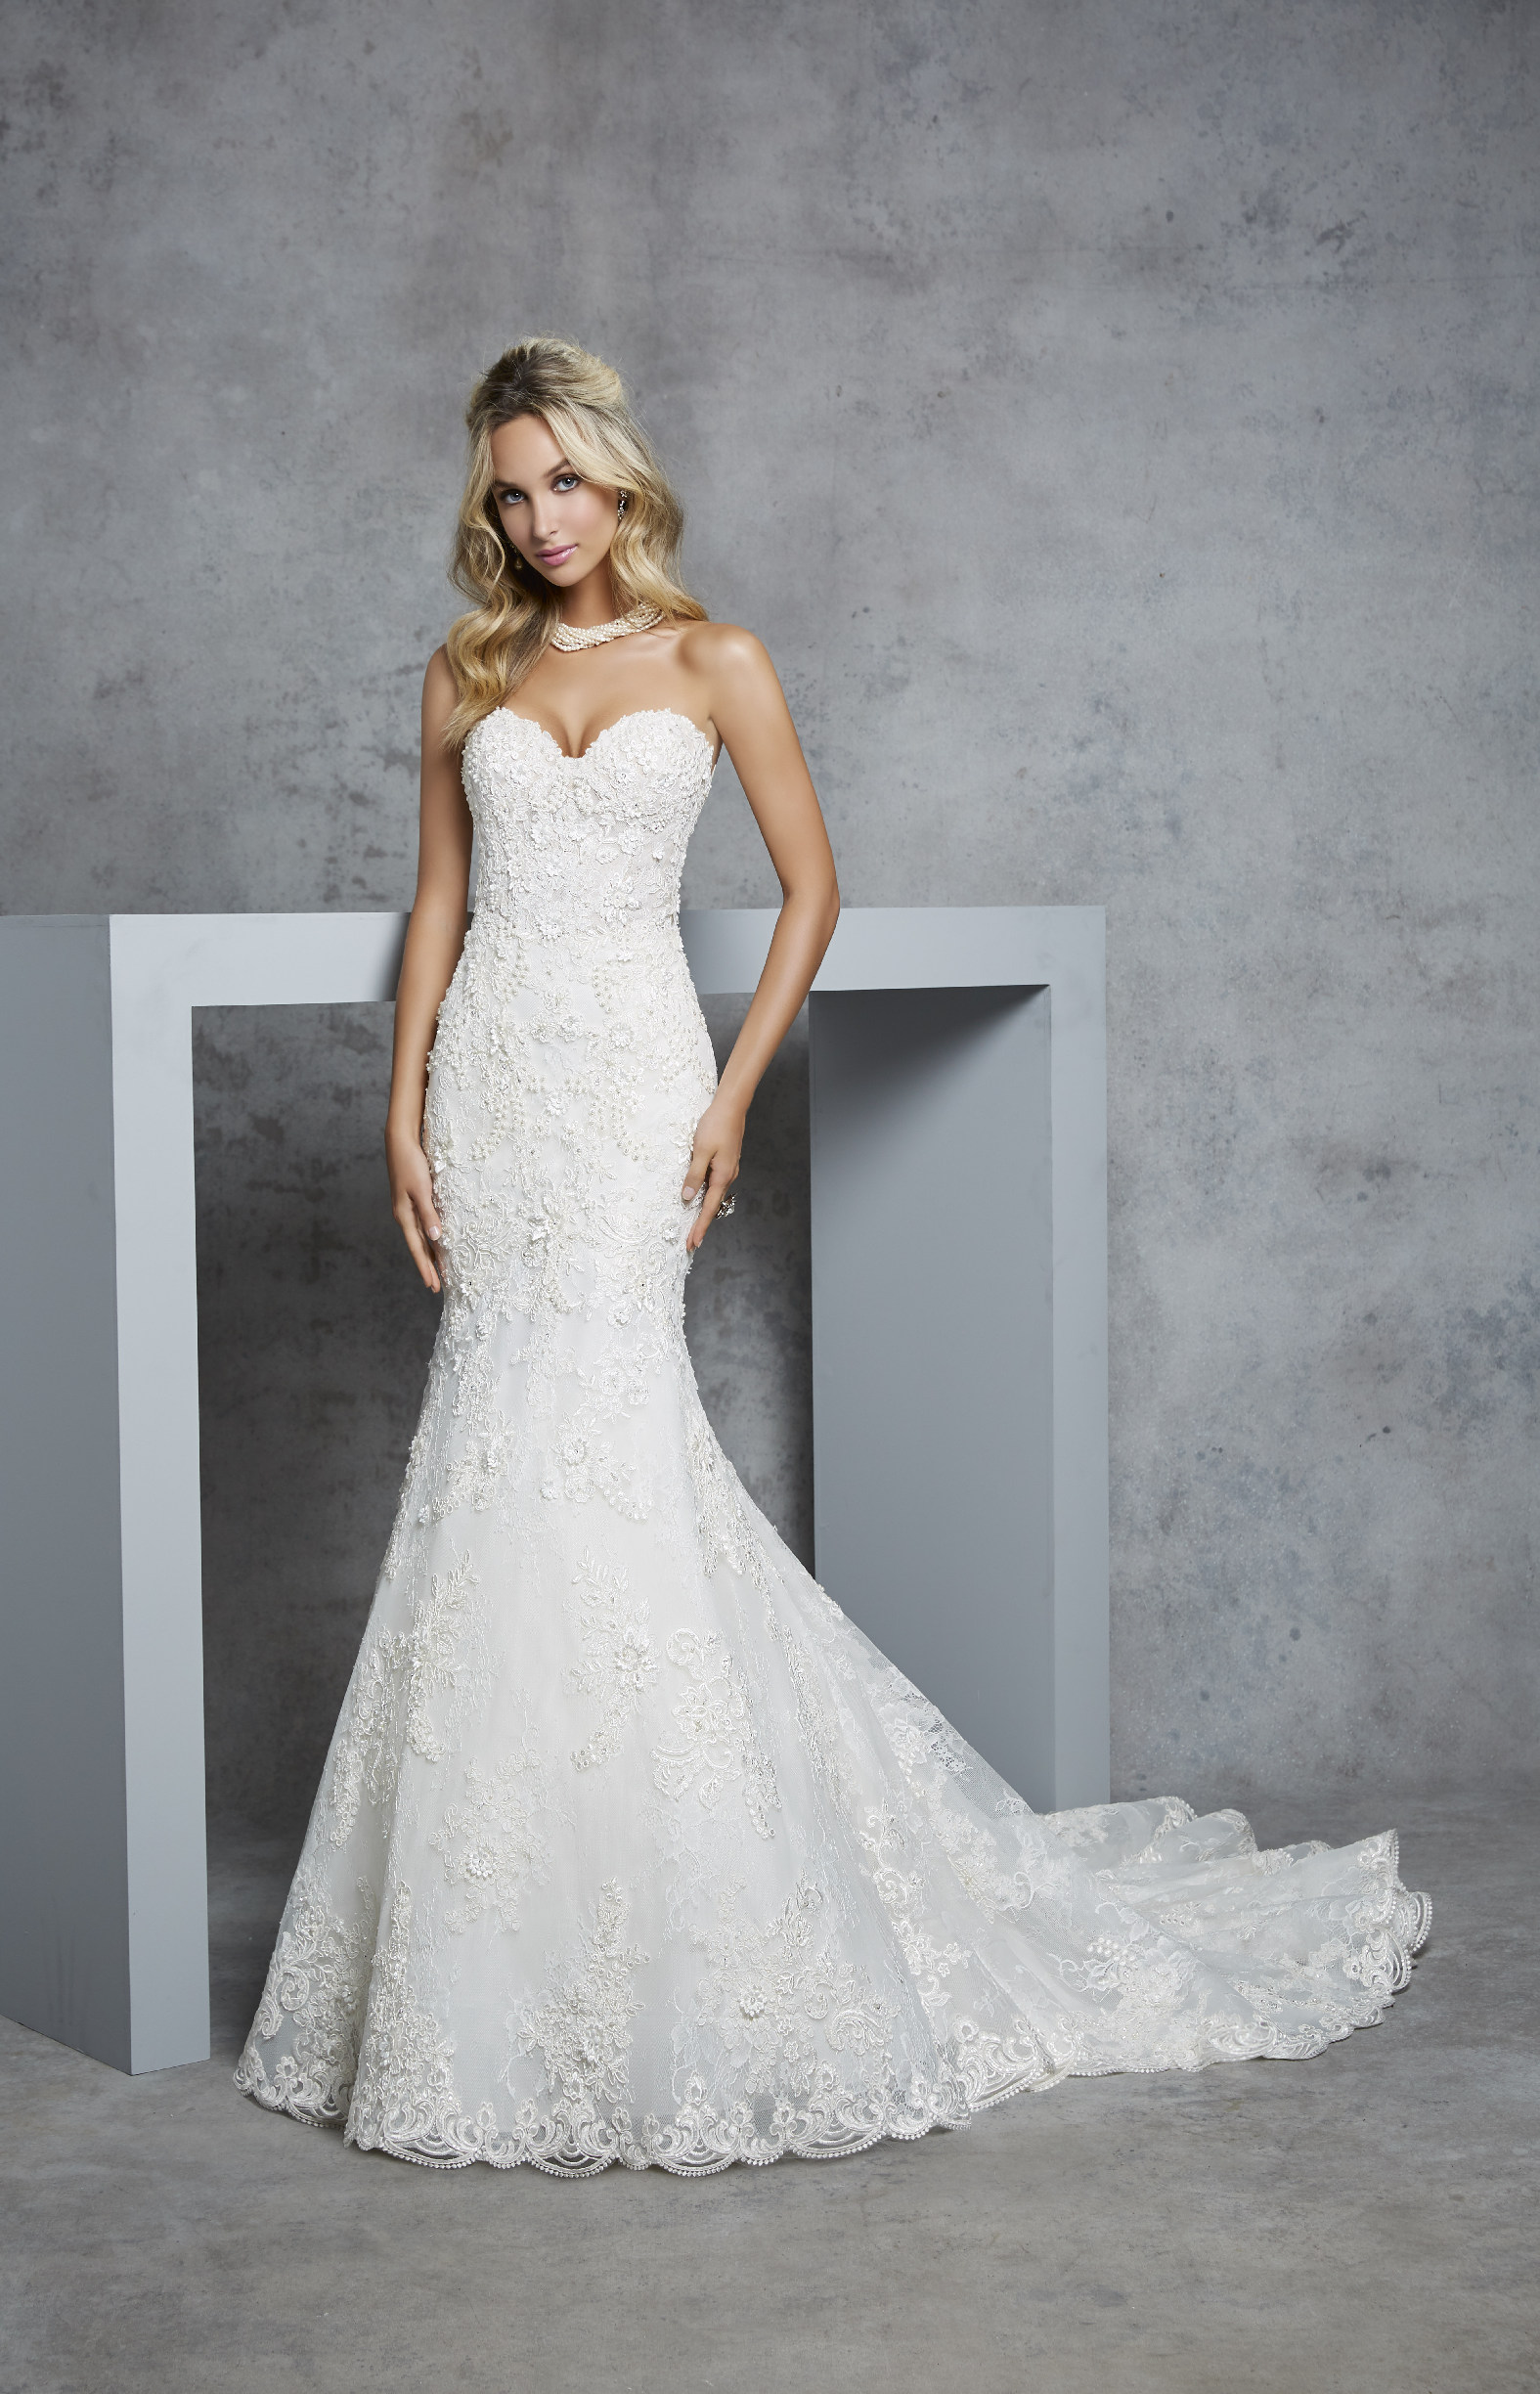 Model in Ronald Joyce 69416, an ivory fit and flare wedding dress silhouette with a strapless sweetheart neckline and beautiful continuous lace detail.